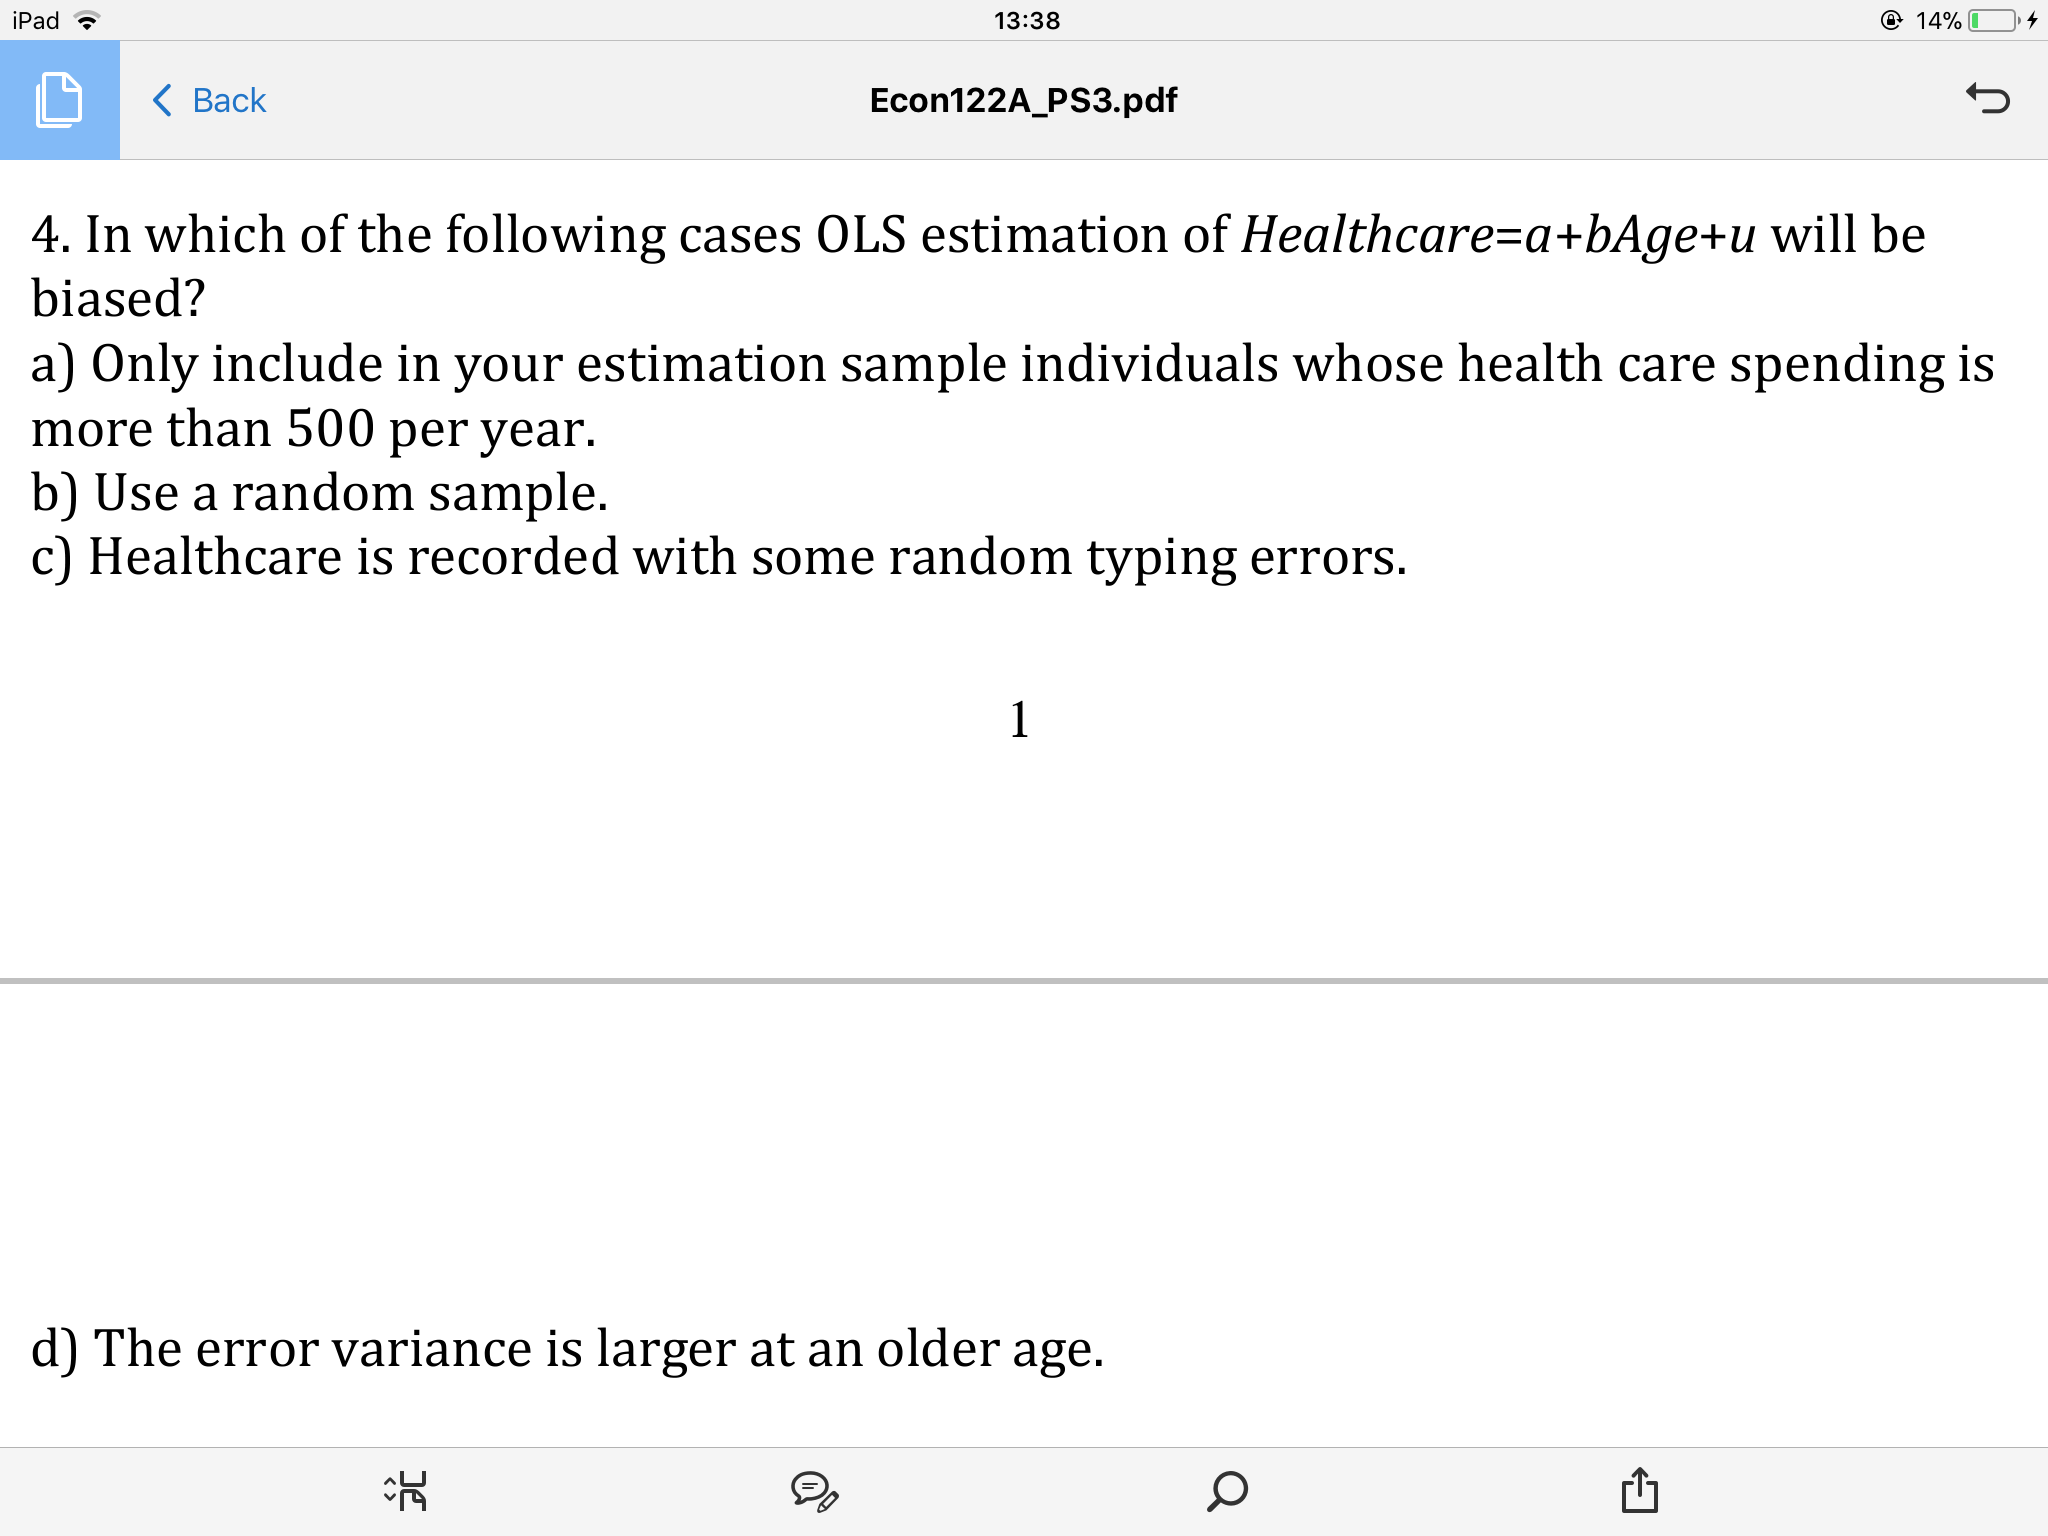 iPad
14%
13:38
< Ваck
Econ122A_PS3.pdf
4. In which of the following cases OLS estimation of Healthcare=a +bAge+u will be
biased?
a) Only include in your estimation sample individuals whose health care spending is
more than 500 per year
b) Use a random sample.
c) Healthcare is recorded with some random typing errors.
1
d) The error variance is larger at an older age.
